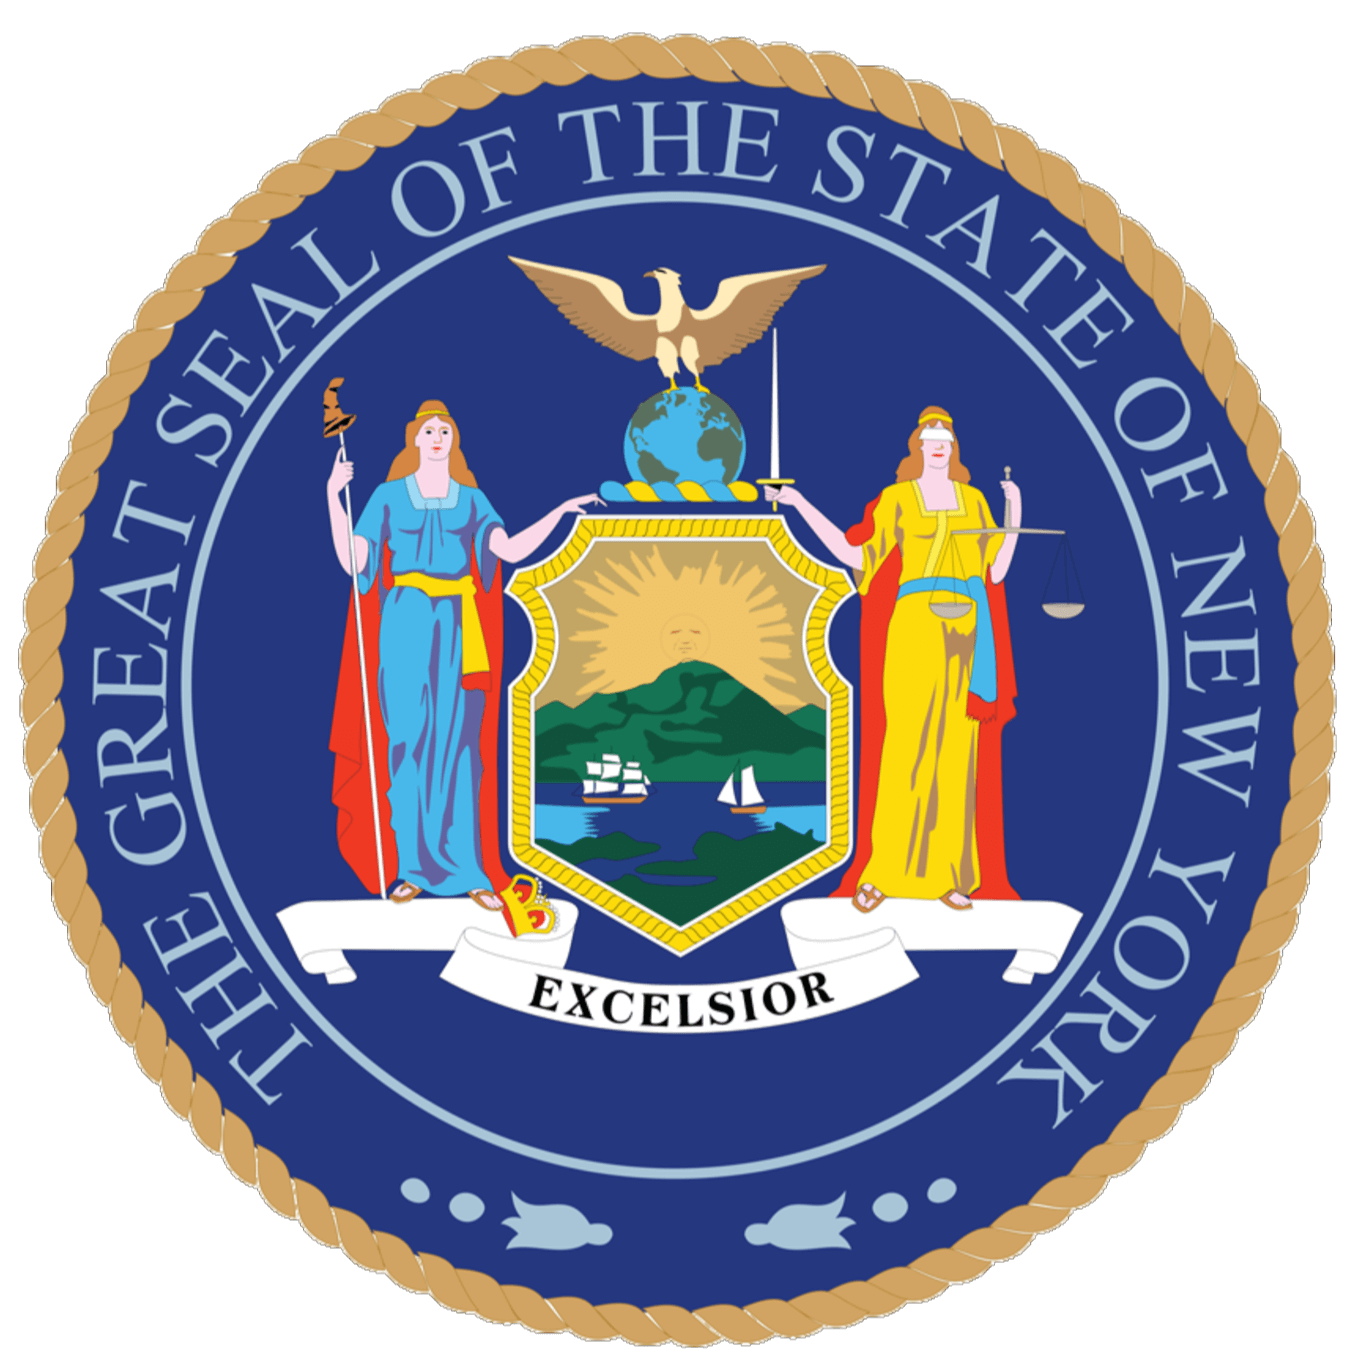 The Great Seal of the State of New York. Excelsior. Illustration of two women holding shield with boats in water in front of mountains and large bird sitting on top of a globe.